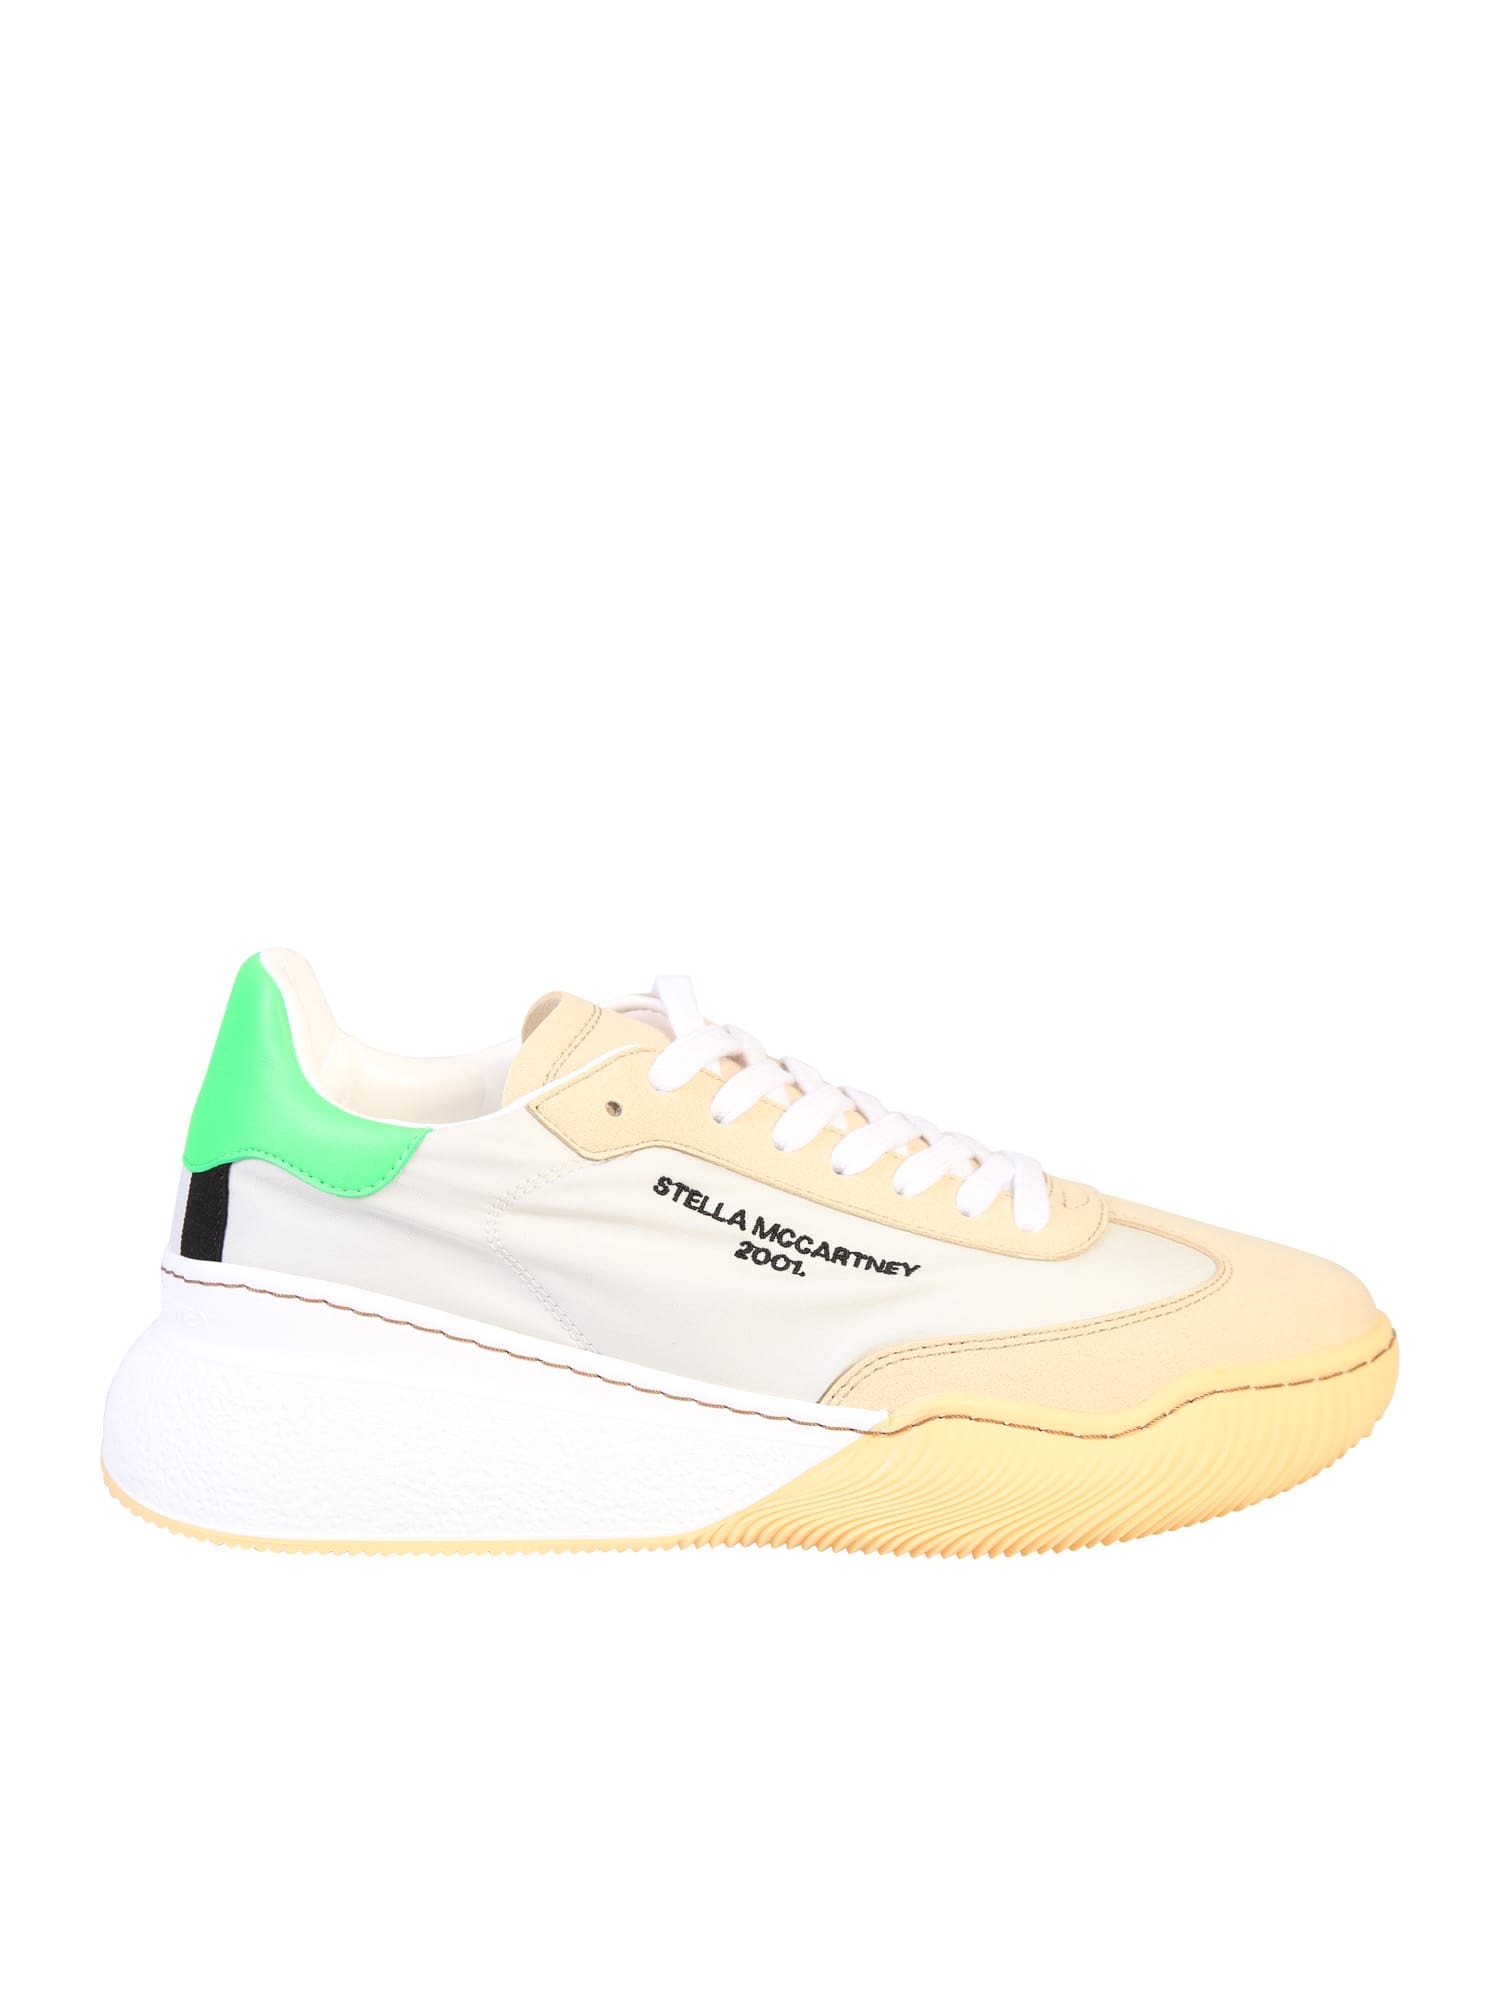 Buy Stella McCartney Branded Sneakers online, shop Stella McCartney shoes with free shipping